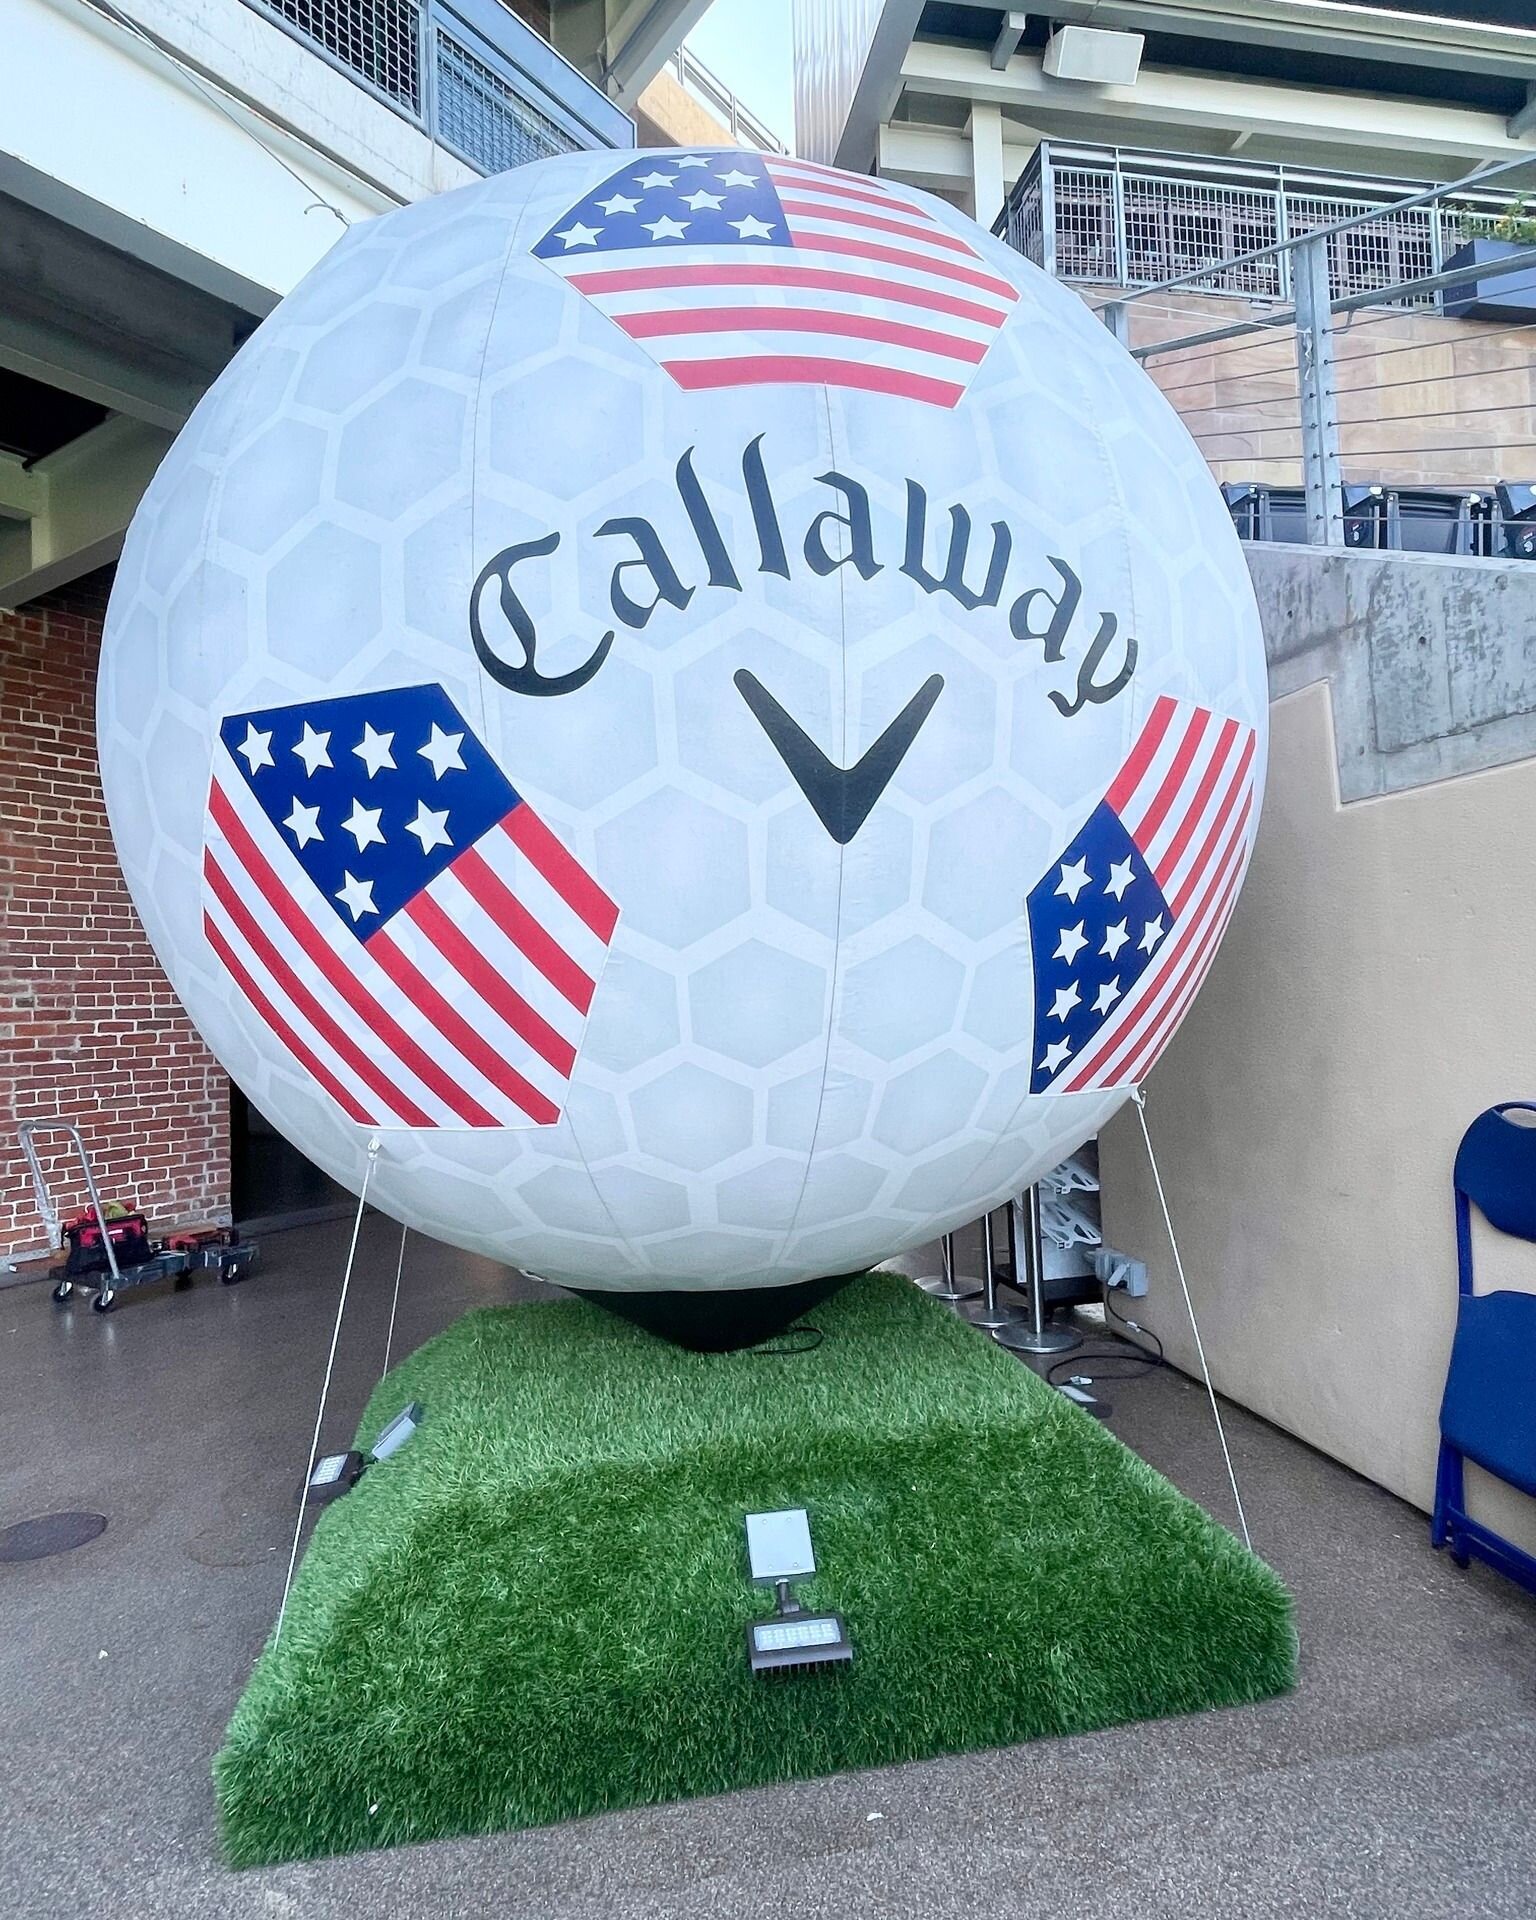 Callaway Golf Ball sponsorship completed just in time for July 4th at Petco Park. Not a bad replica standing 12 feet tall in left field. Happy Independence Day! 🇺🇸
#concept45 #stadiumbranding #july4th 
https://www.concept45.com/